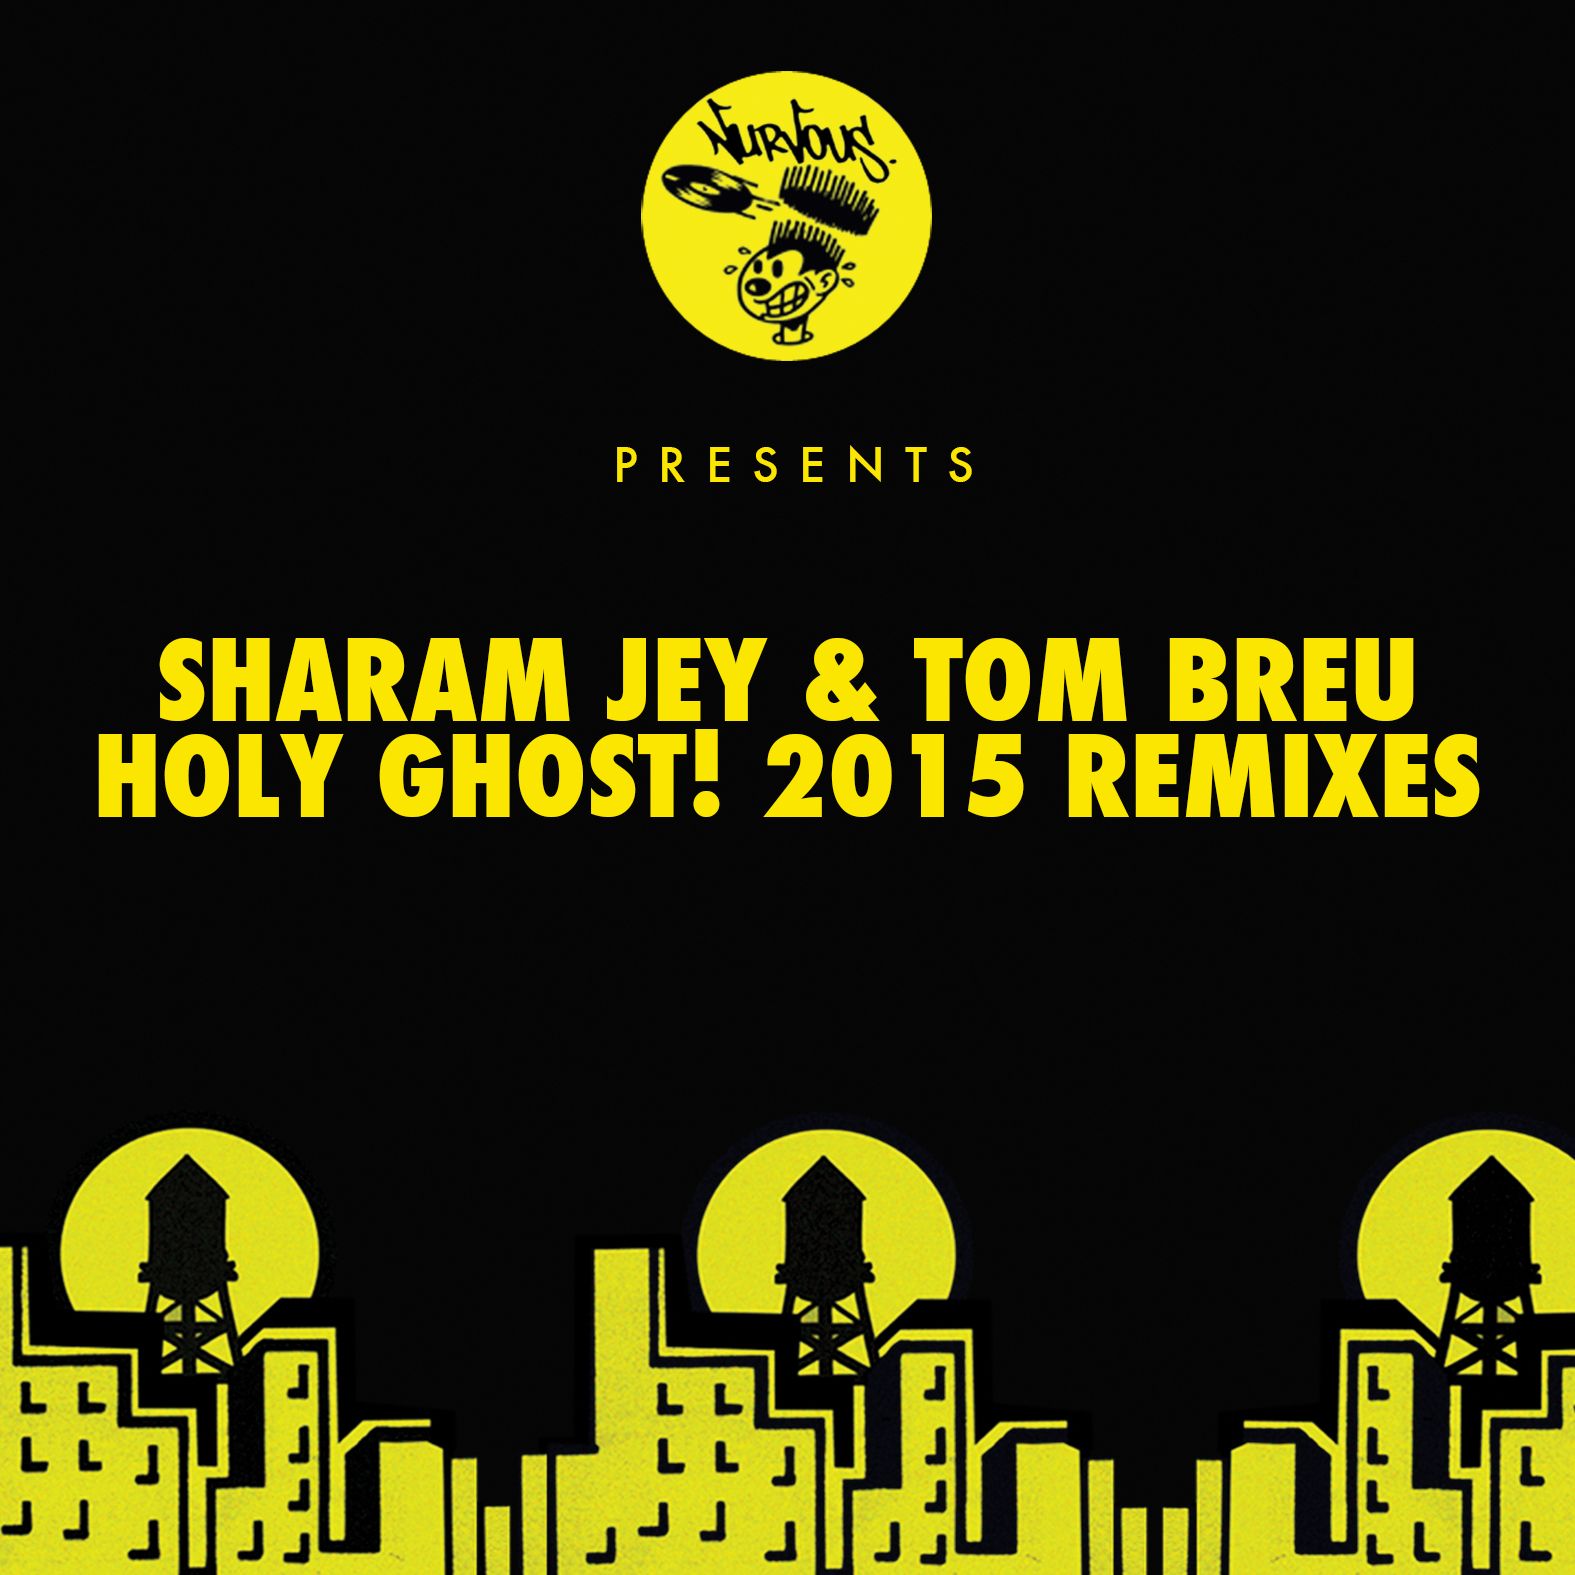 Holy Ghost! (2015 Remixes)